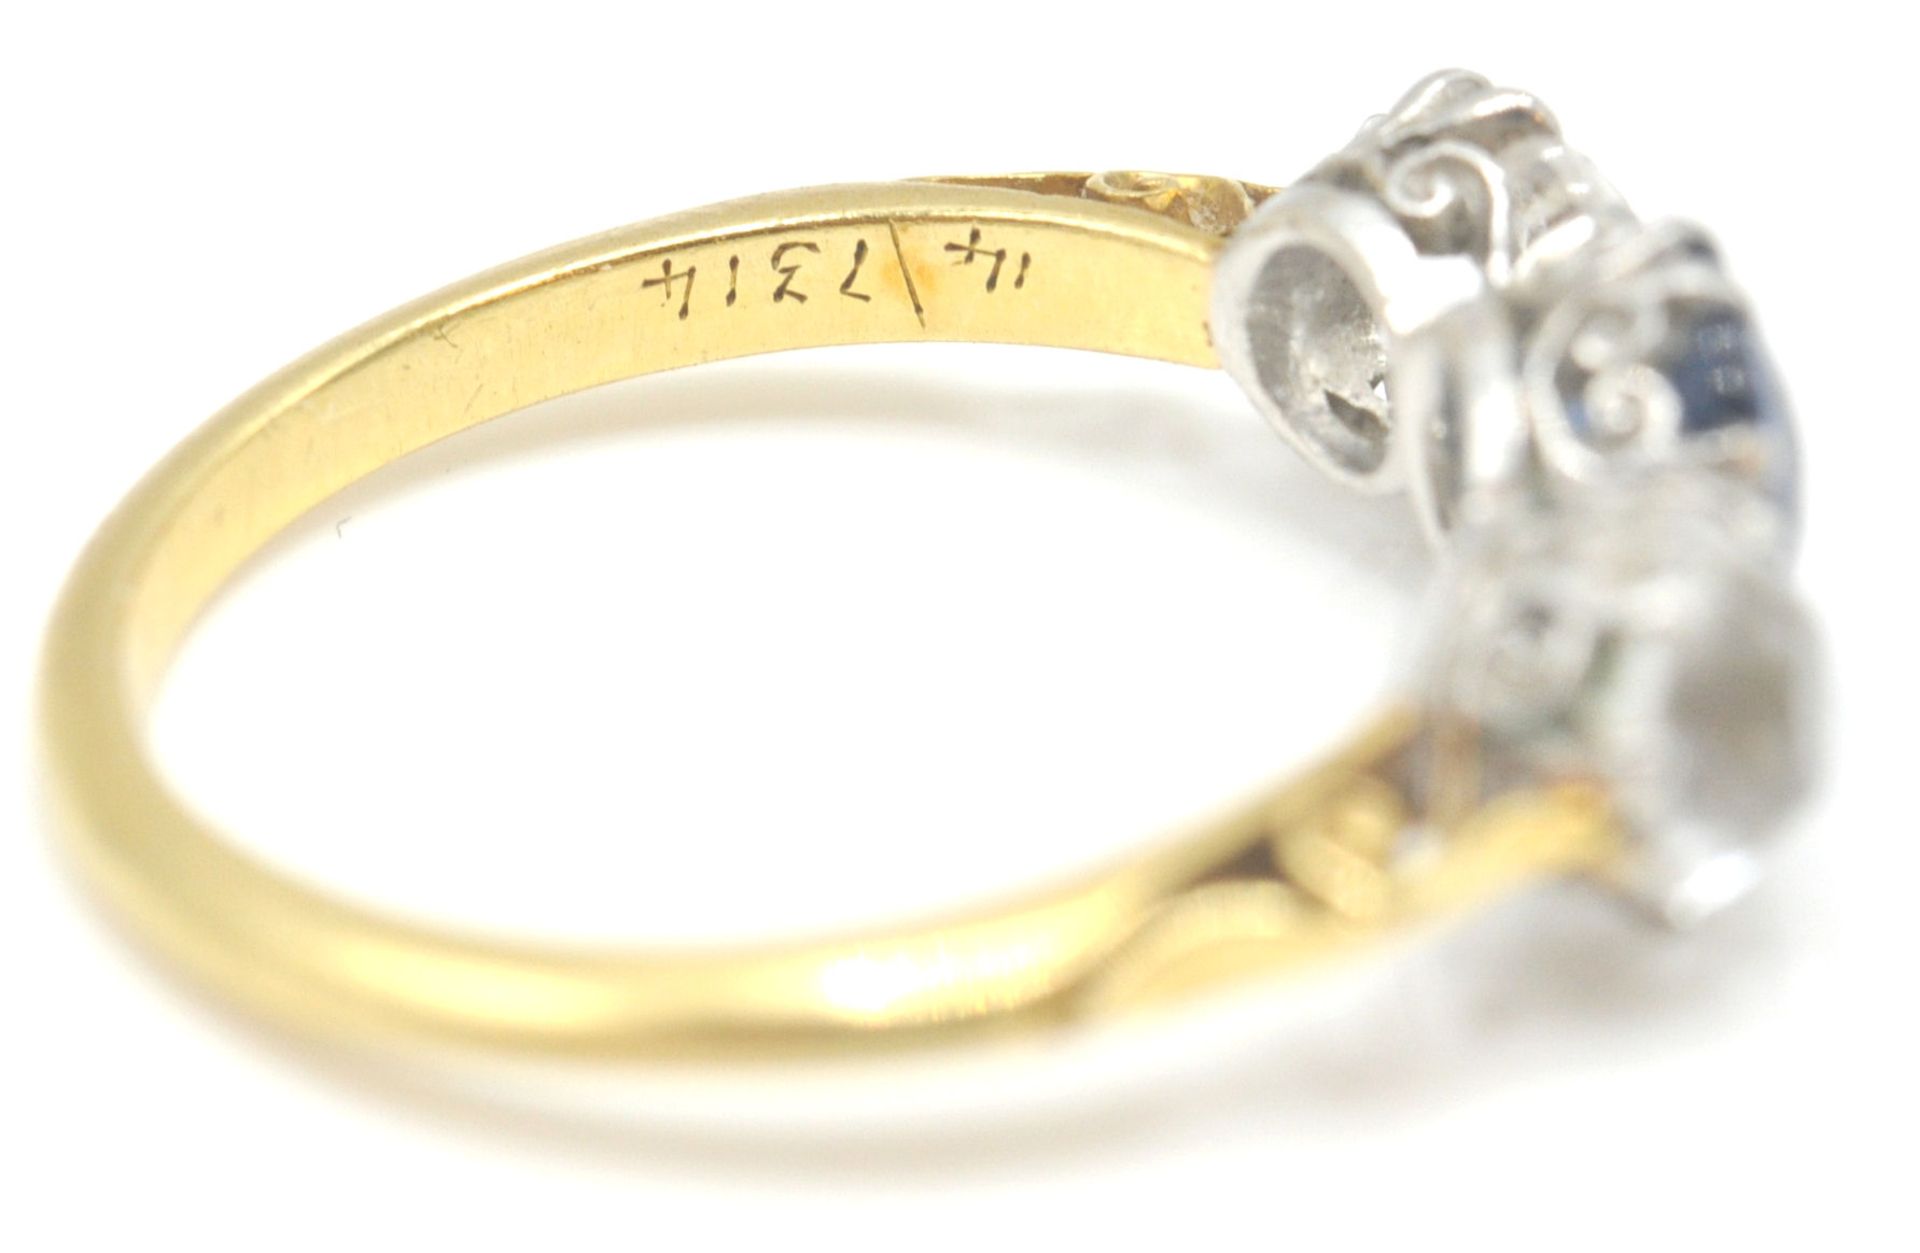 An Edwardian period 18ct gold and platinum 3 stone ring. The ring set with 3 paste stones of round - Bild 8 aus 8